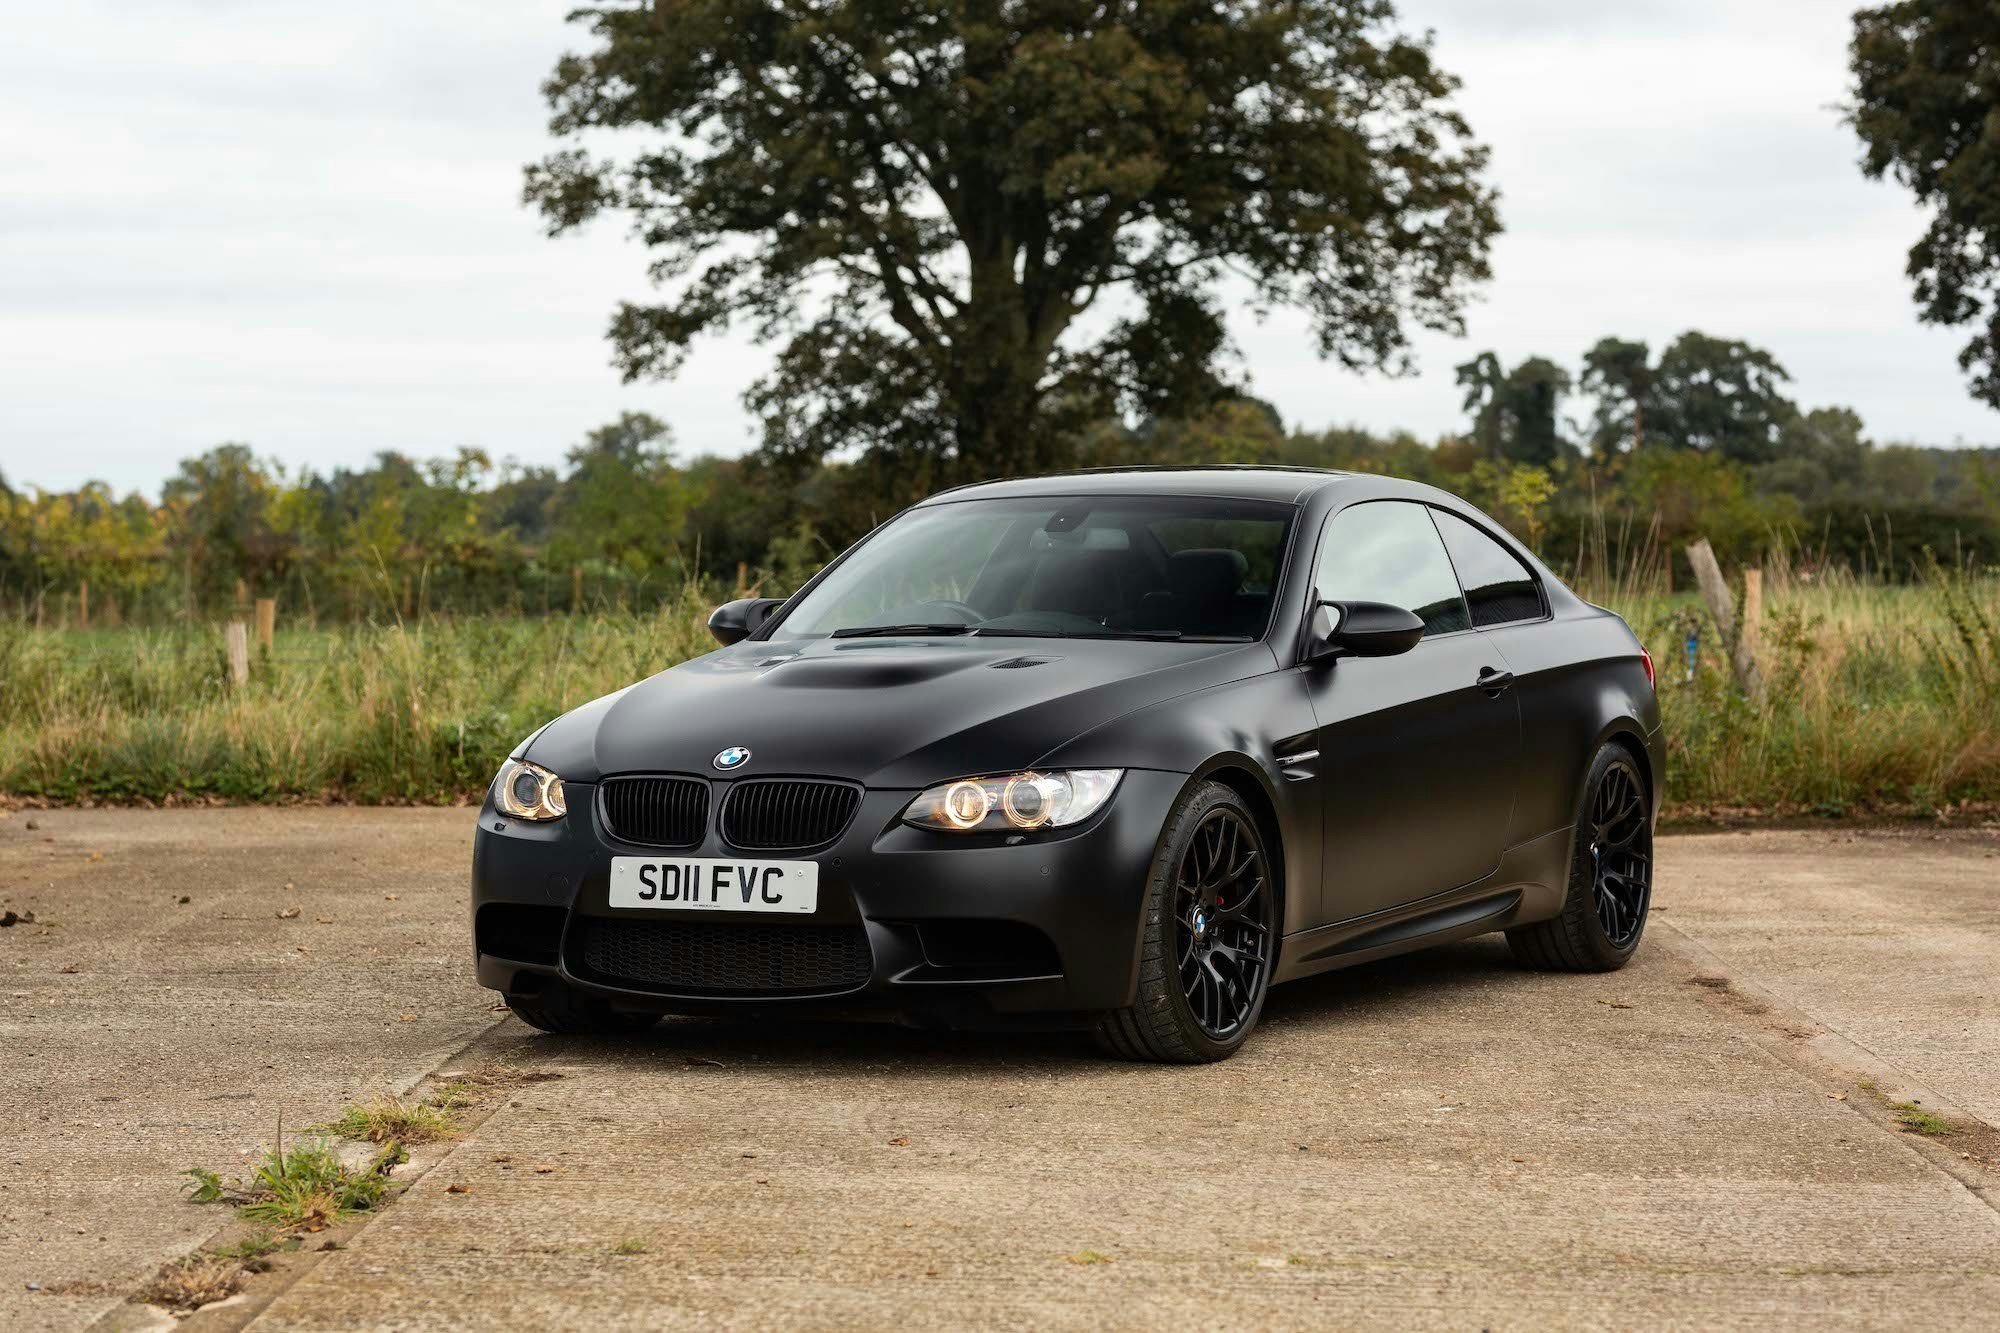 The BMW M3 E92 is Still Terrific in Every Way  Tarmac Life  Motoring   Tech  Experiences